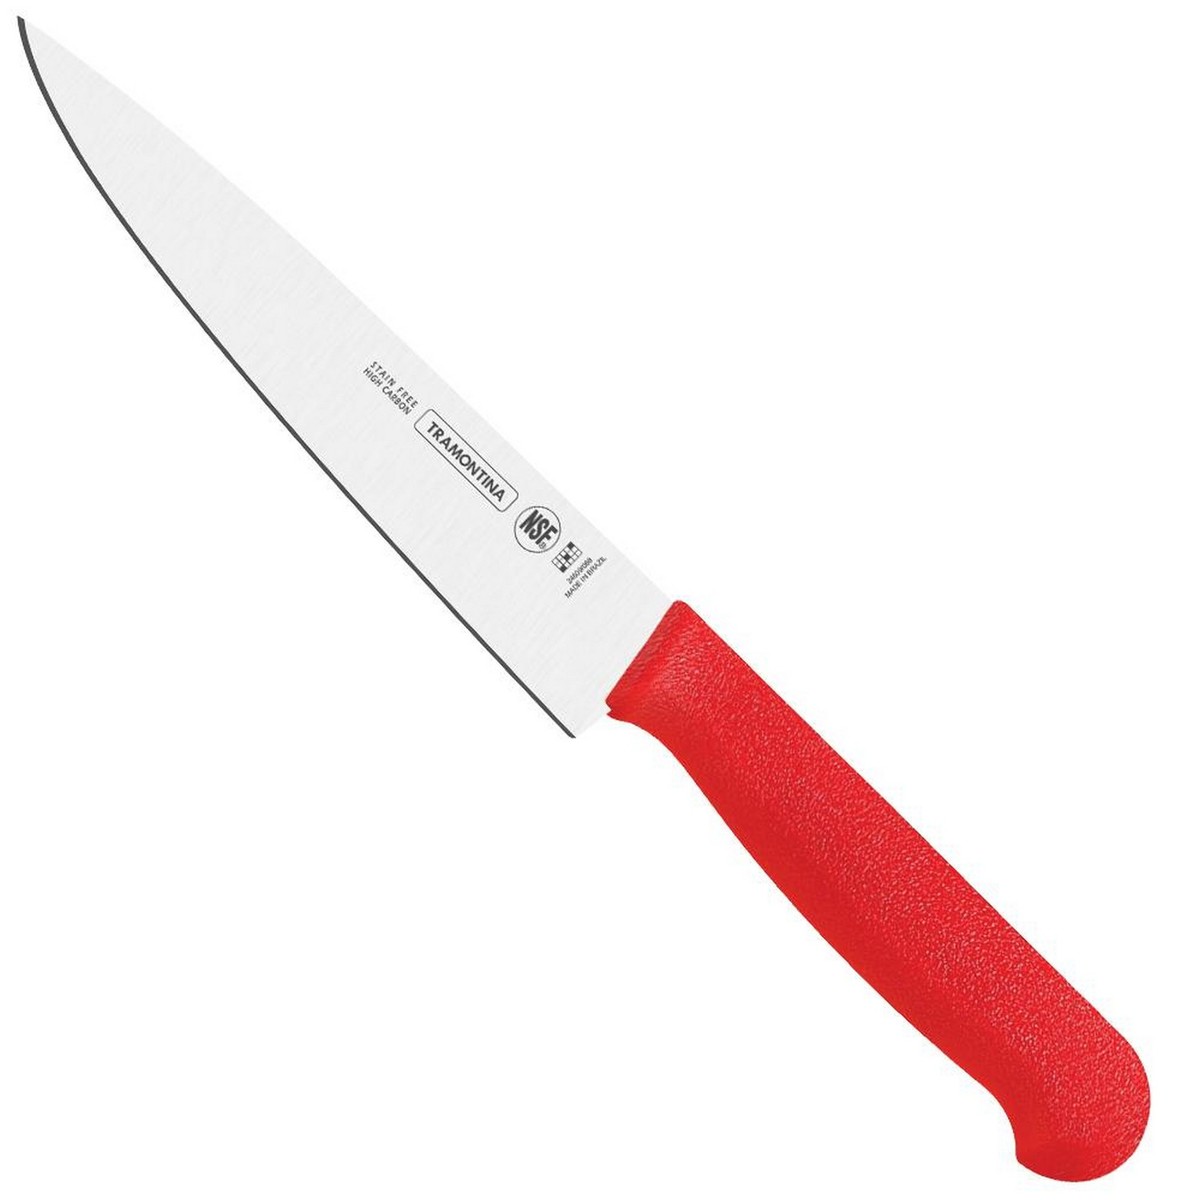 Tramontina Meat Knife RD-24620/178 8inch